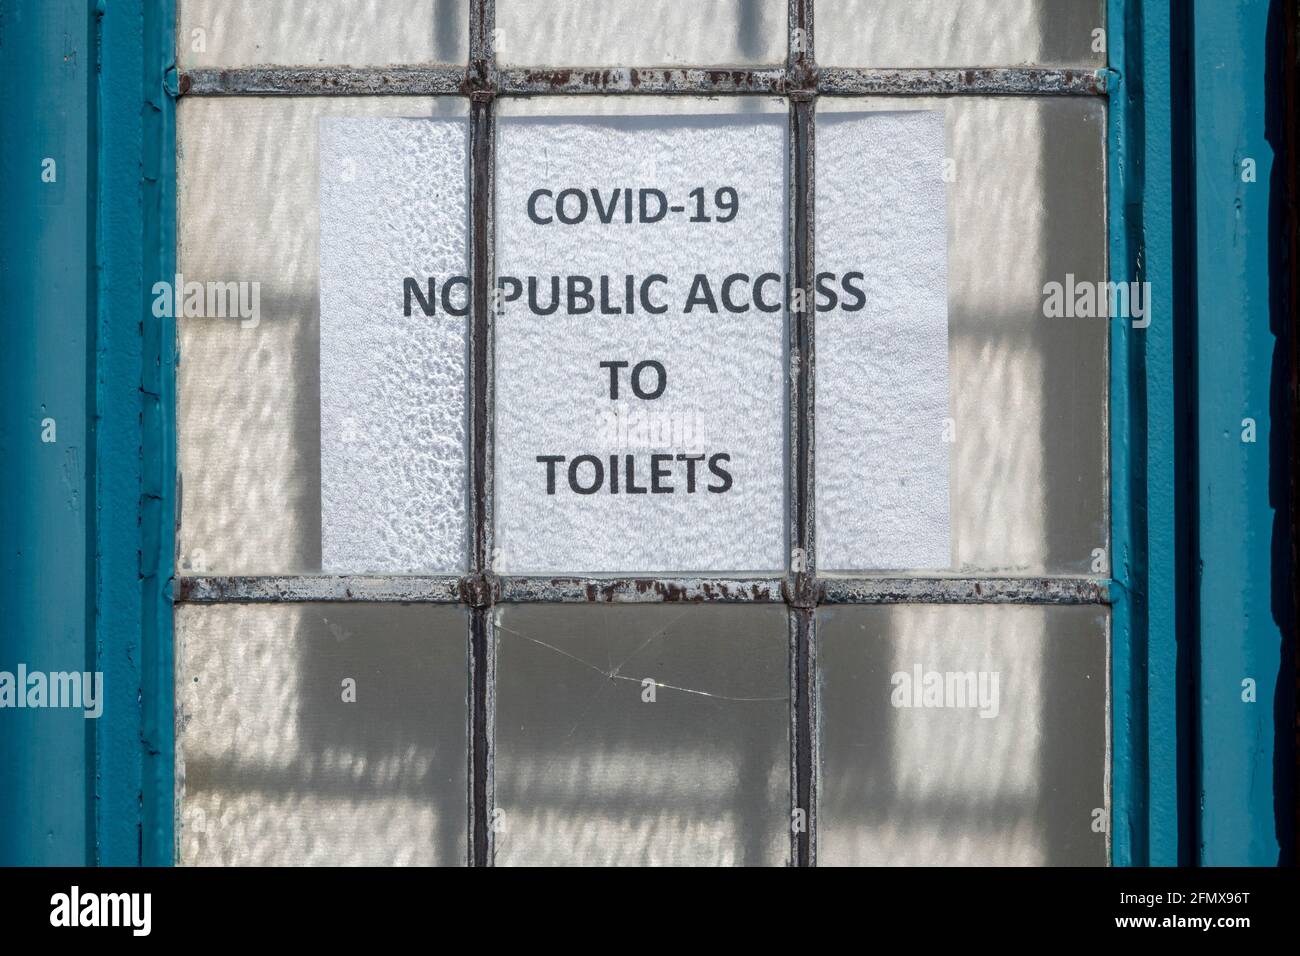 A Covid -19 'No Public Access to Toilets'  sign stuck to the back of a leaded window in a wooden frame Stock Photo